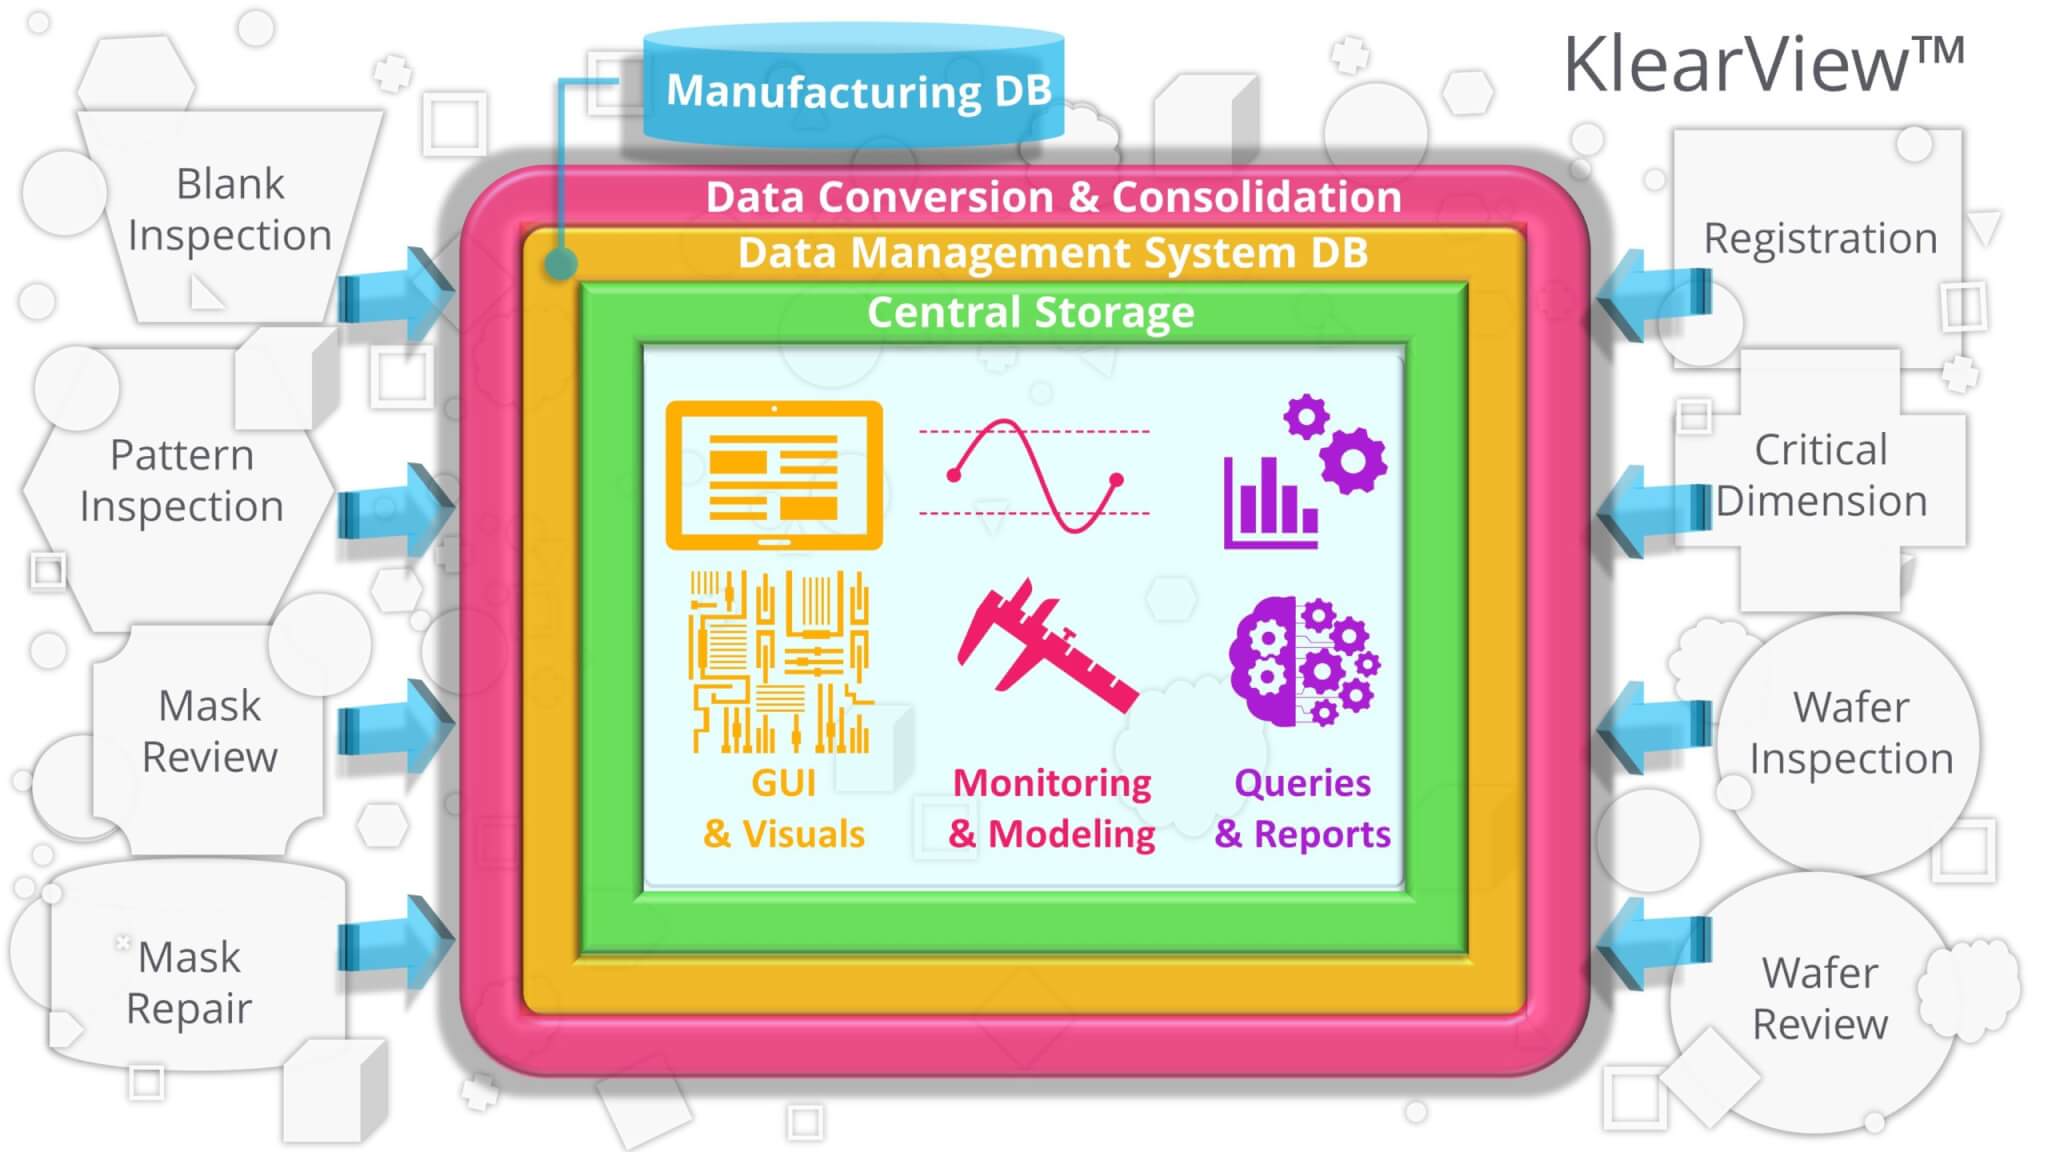 A key element of KLA’s Reticle Decision Center (RDC) platform, KlearView™ consolidates all your reticle inspection and metrology data enabling quicker process improvement decisions.